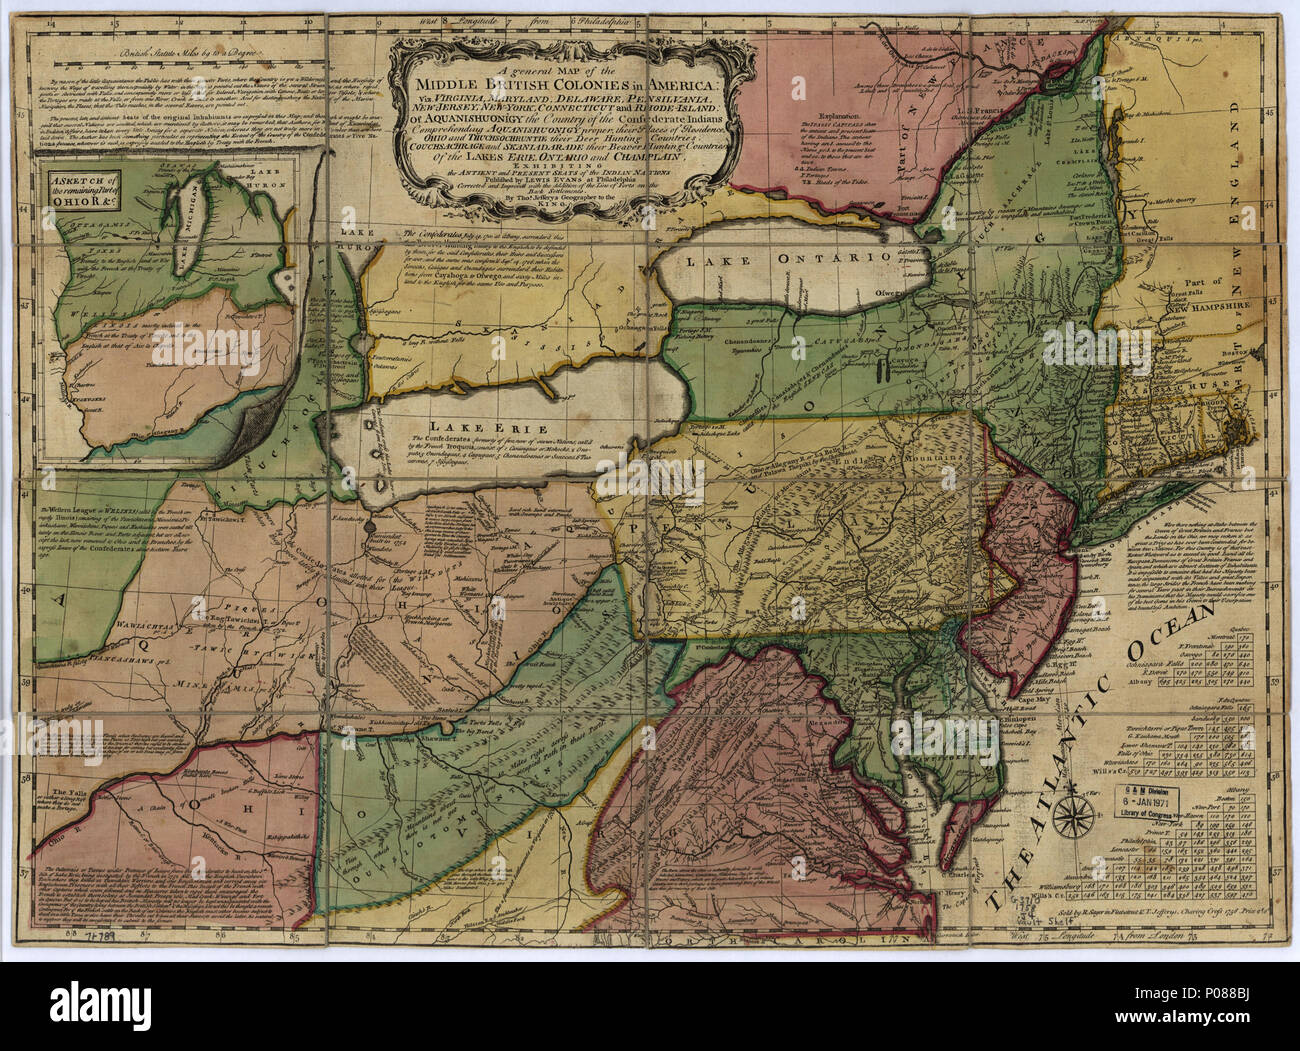 107 A general map of the middle British colonies in America- Viz. Virginia, Maryland, Delaware, Pensilvania, New-Jersey, New-York, Connecticut, and Rhode-Island- Of Aquanishuonîgy the country of the LOC gm71000789 Stock Photo